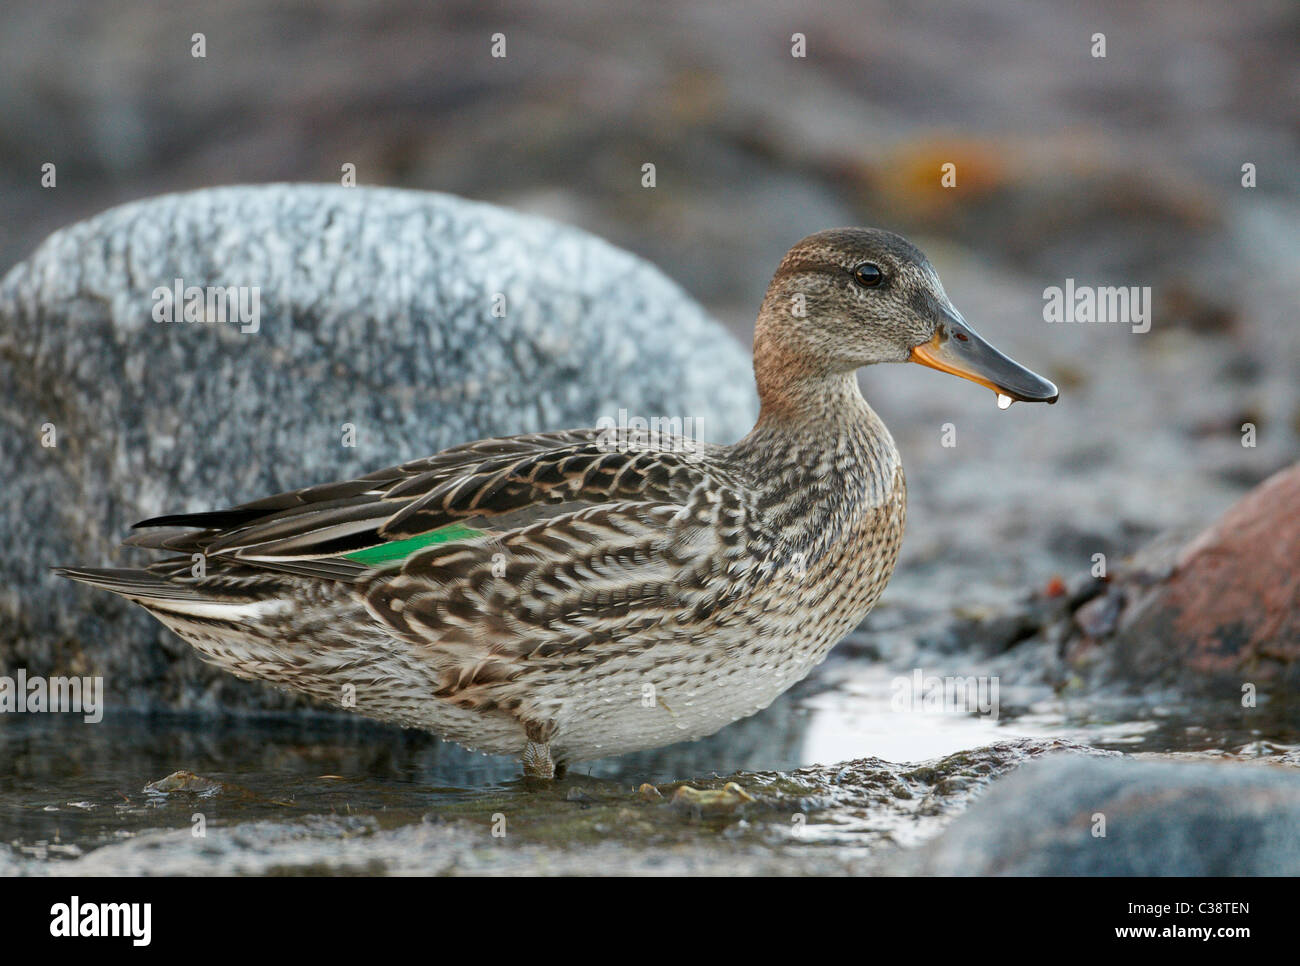 Common Teal (Anas crecca) standing in shallow water. Stock Photo